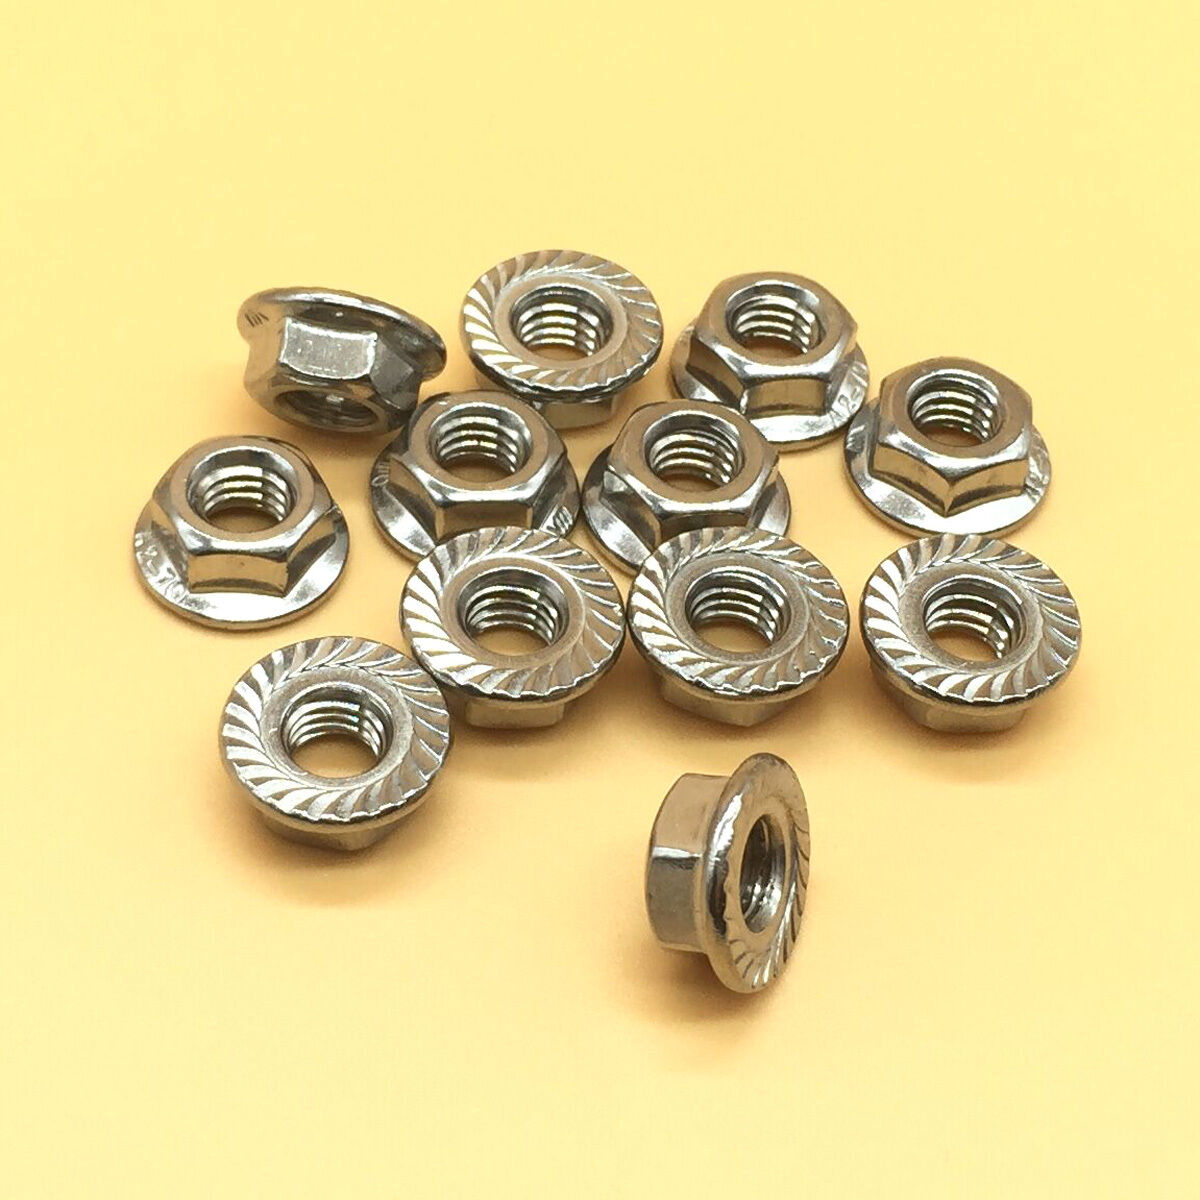 M3 x 0.5 Stainless Steel Flange Hex Nut Right Hand Thread 12Pcs [M1]